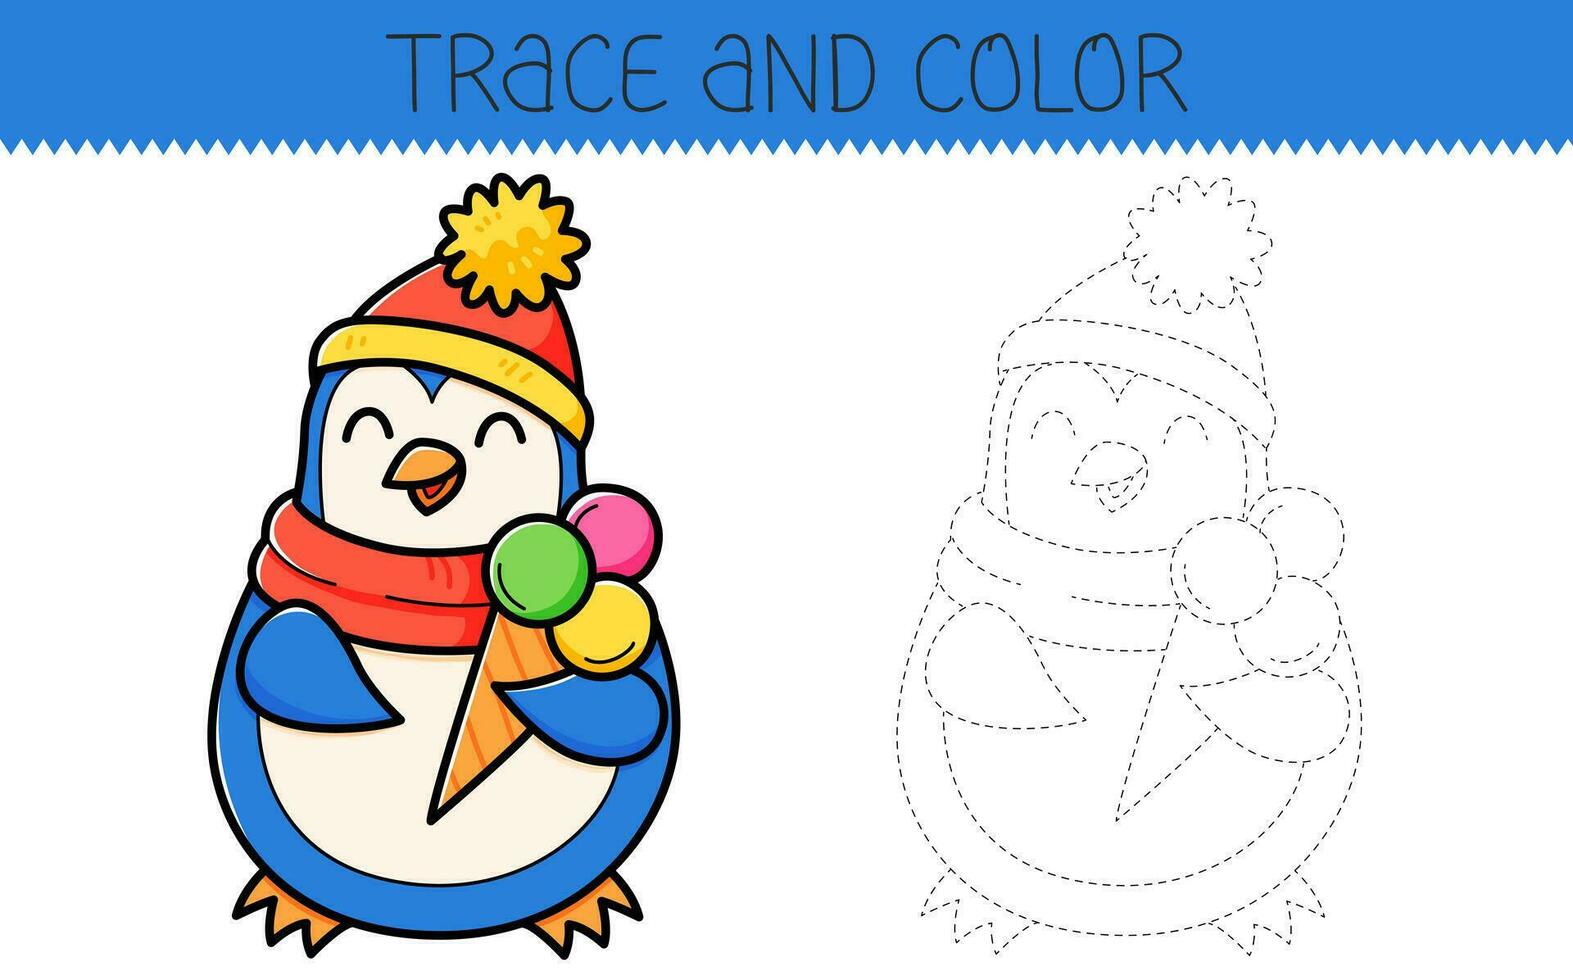 Trace and color coloring book with penguin with ice cream for kids. Coloring page with cartoon penguin with ice cream. Vector illustration